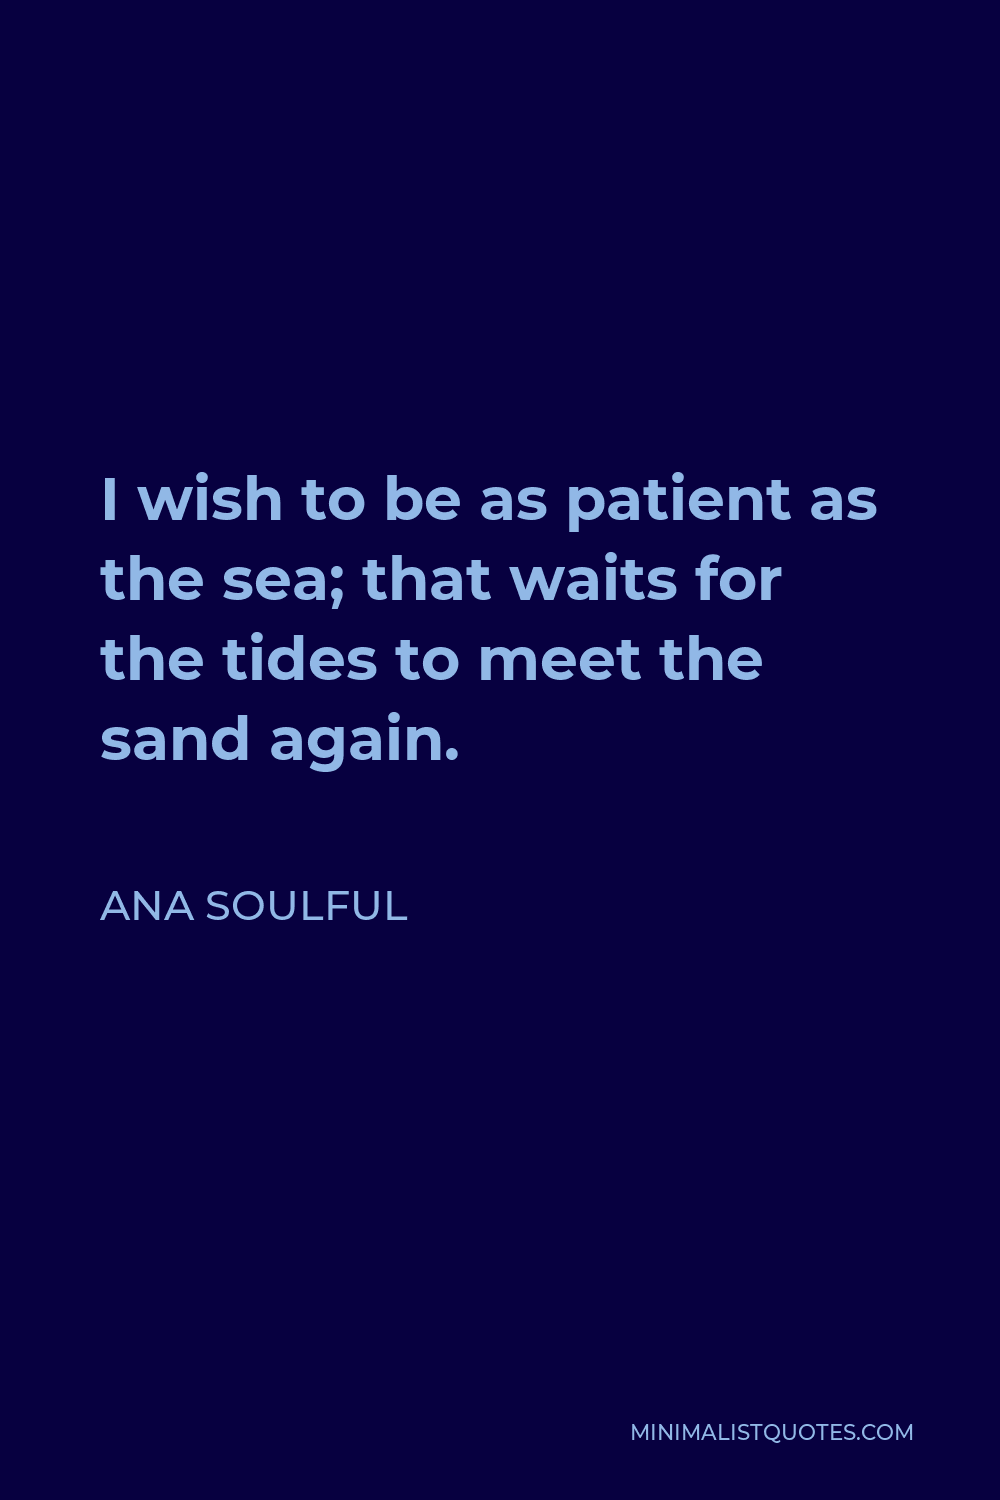 Ana Soulful Quote - I wish to be as patient as the sea. That waits for the tides to meet the sand again.